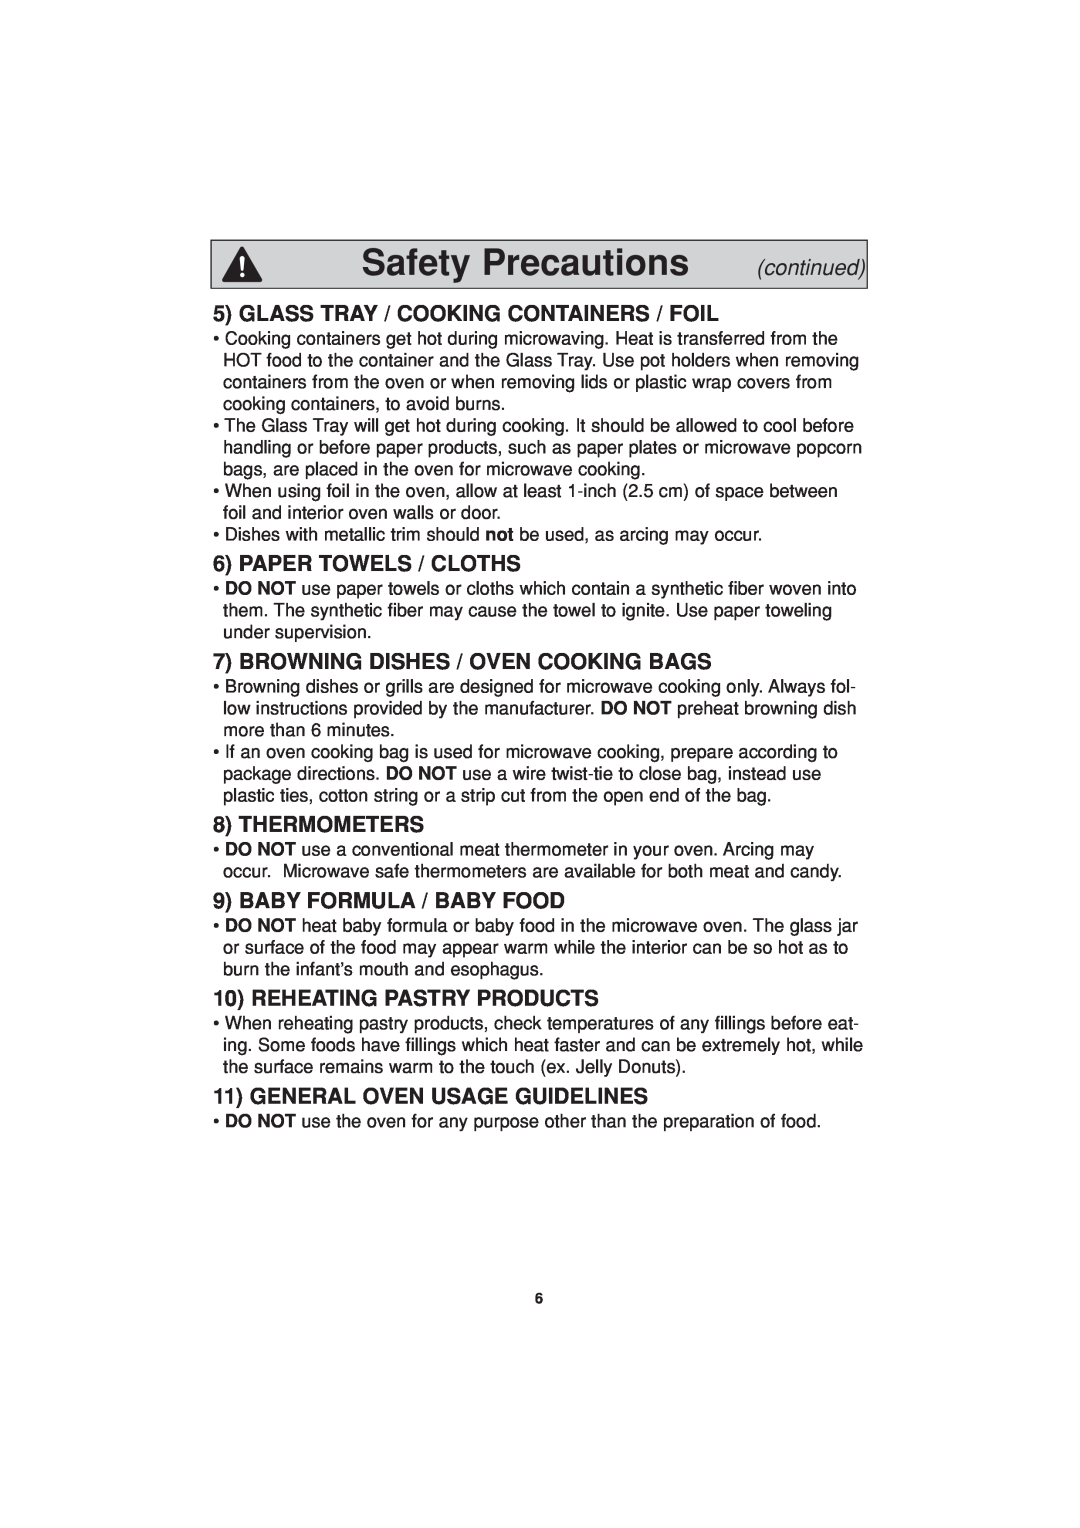 Panasonic NN-H644, NN-H634 Safety Precautions, Glass Tray / Cooking Containers / Foil, Paper Towels / Cloths, Thermometers 